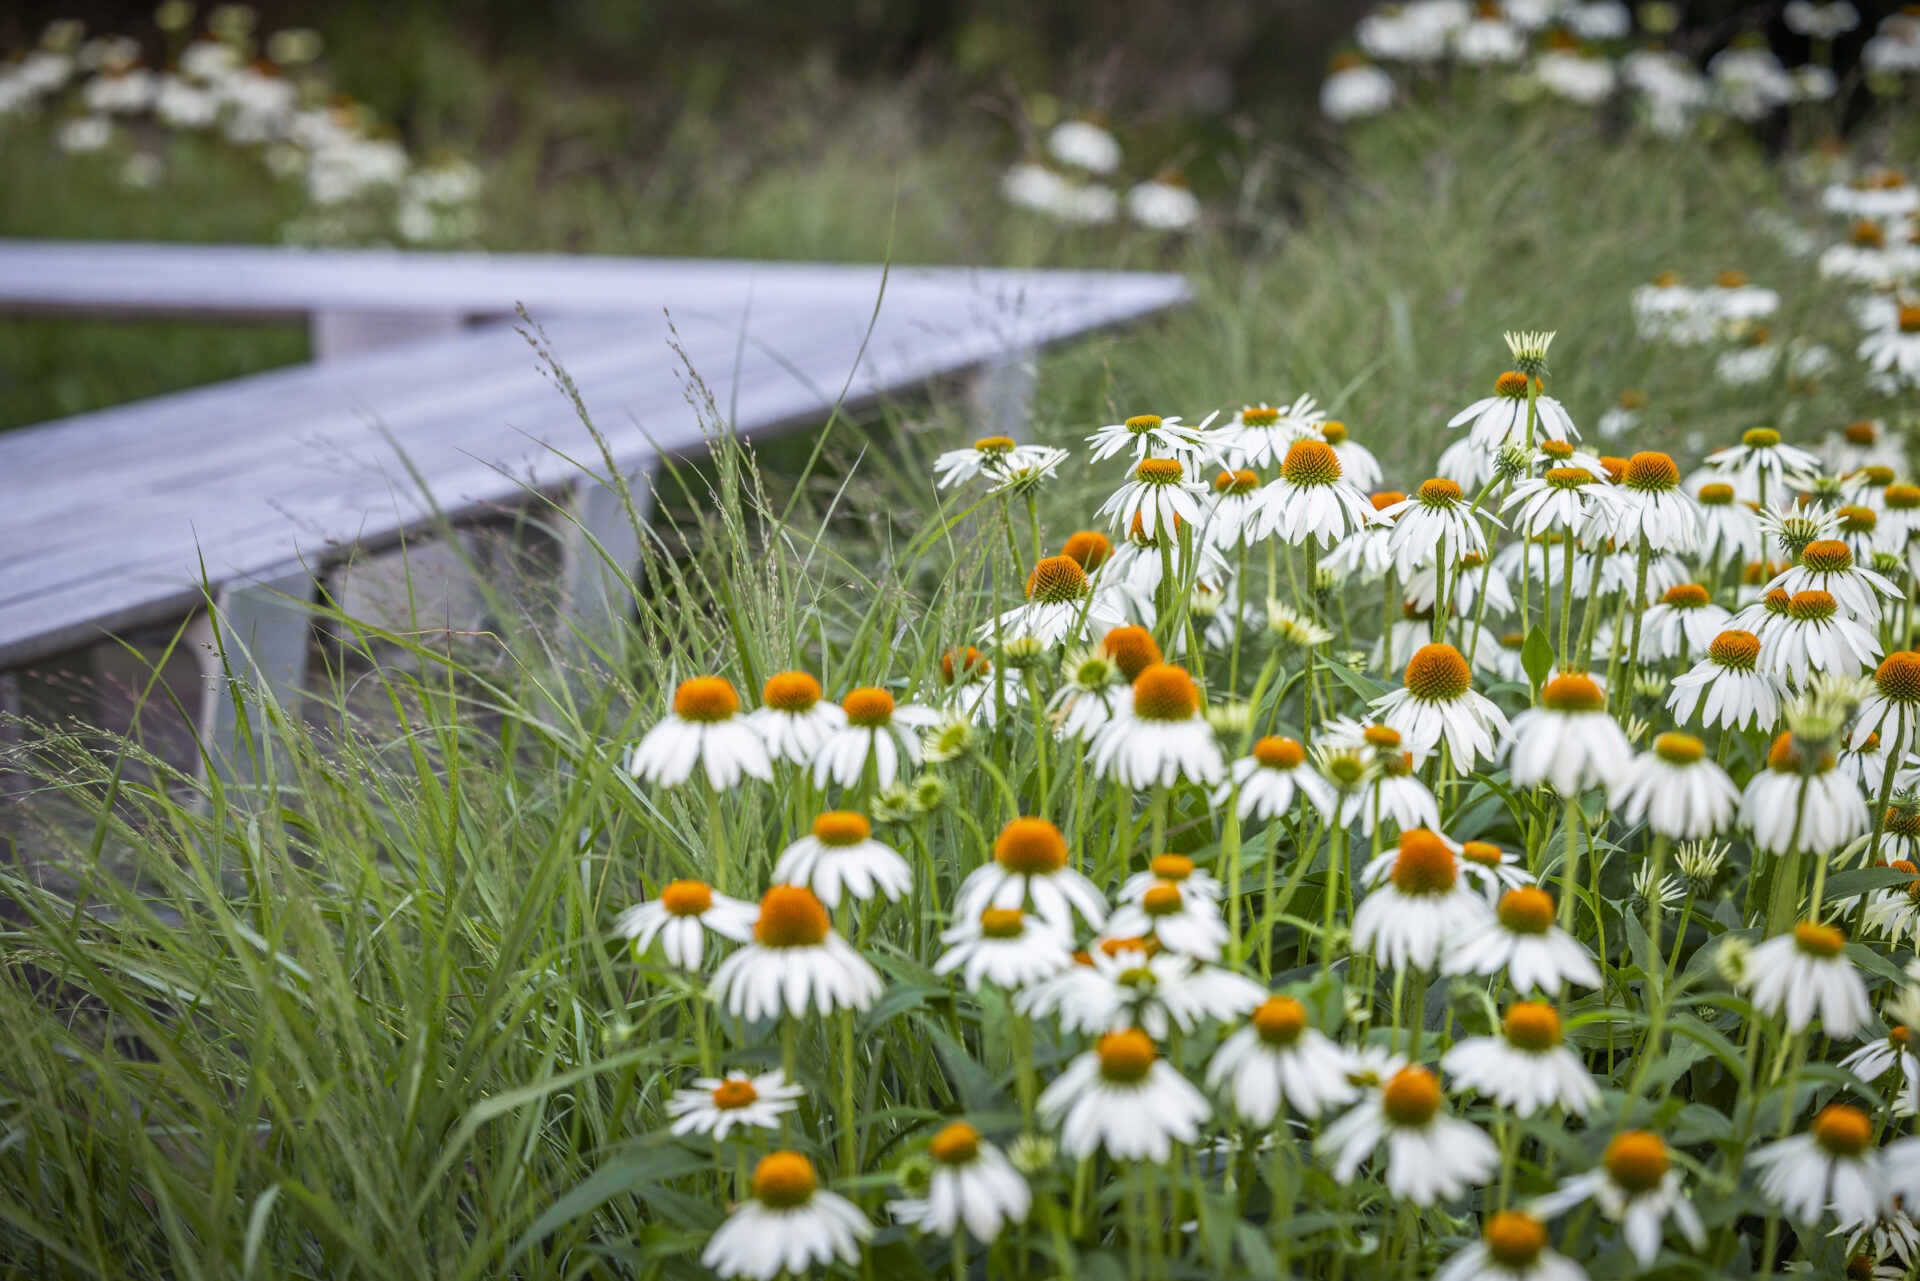 White daisies with yellow centers bloom amidst greenery, next to an unfocused wooden walkway, conveying a serene, natural outdoor setting.